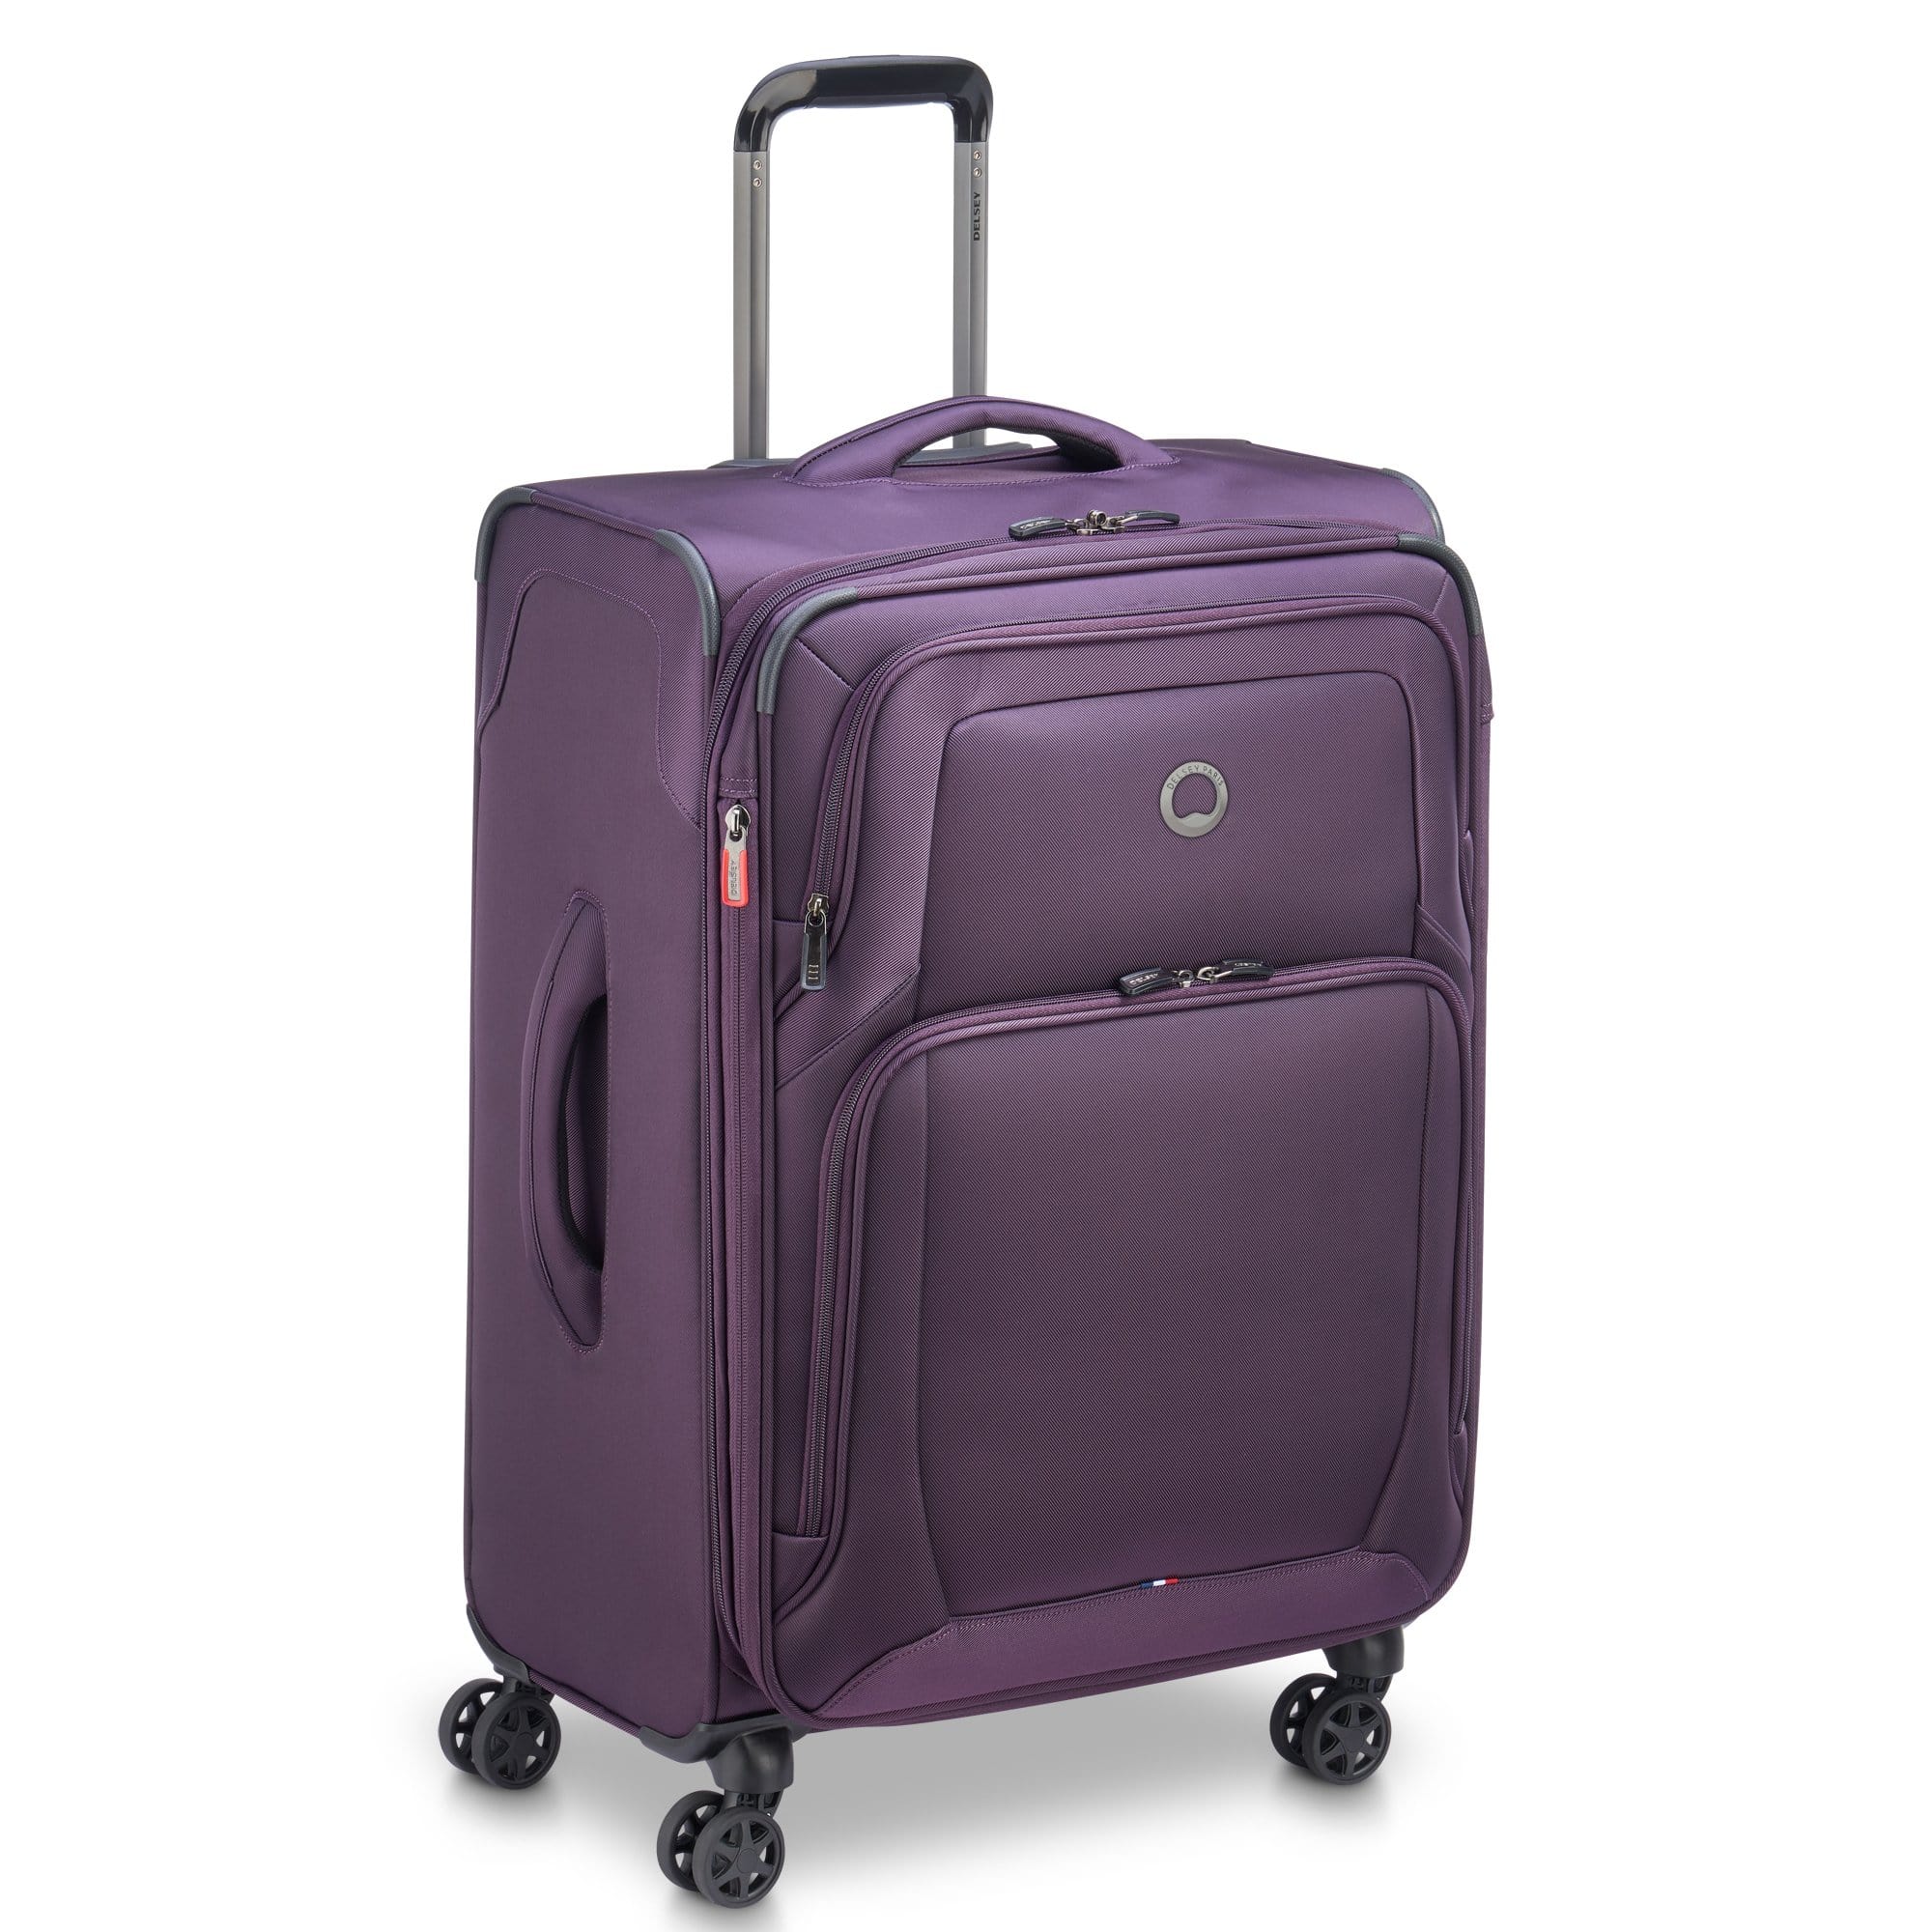 Delsey Optimax Lite 70cm Softcase 4 Double Wheel Expandable Check-In Luggage Trolley Purple - 00328582008T9